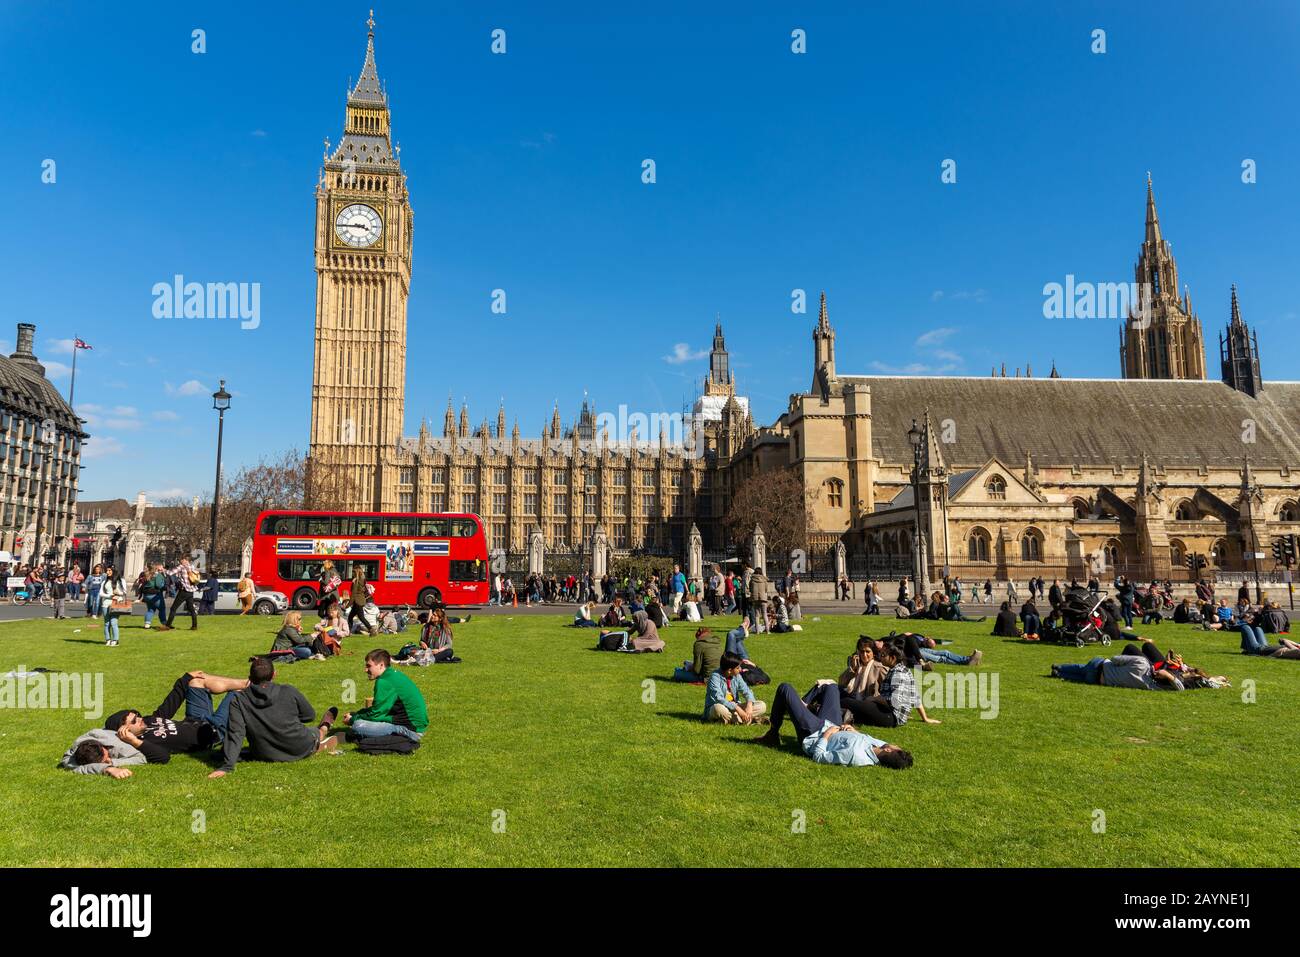 People relaxing in Parliament Square, London, England, UK Stock Photo